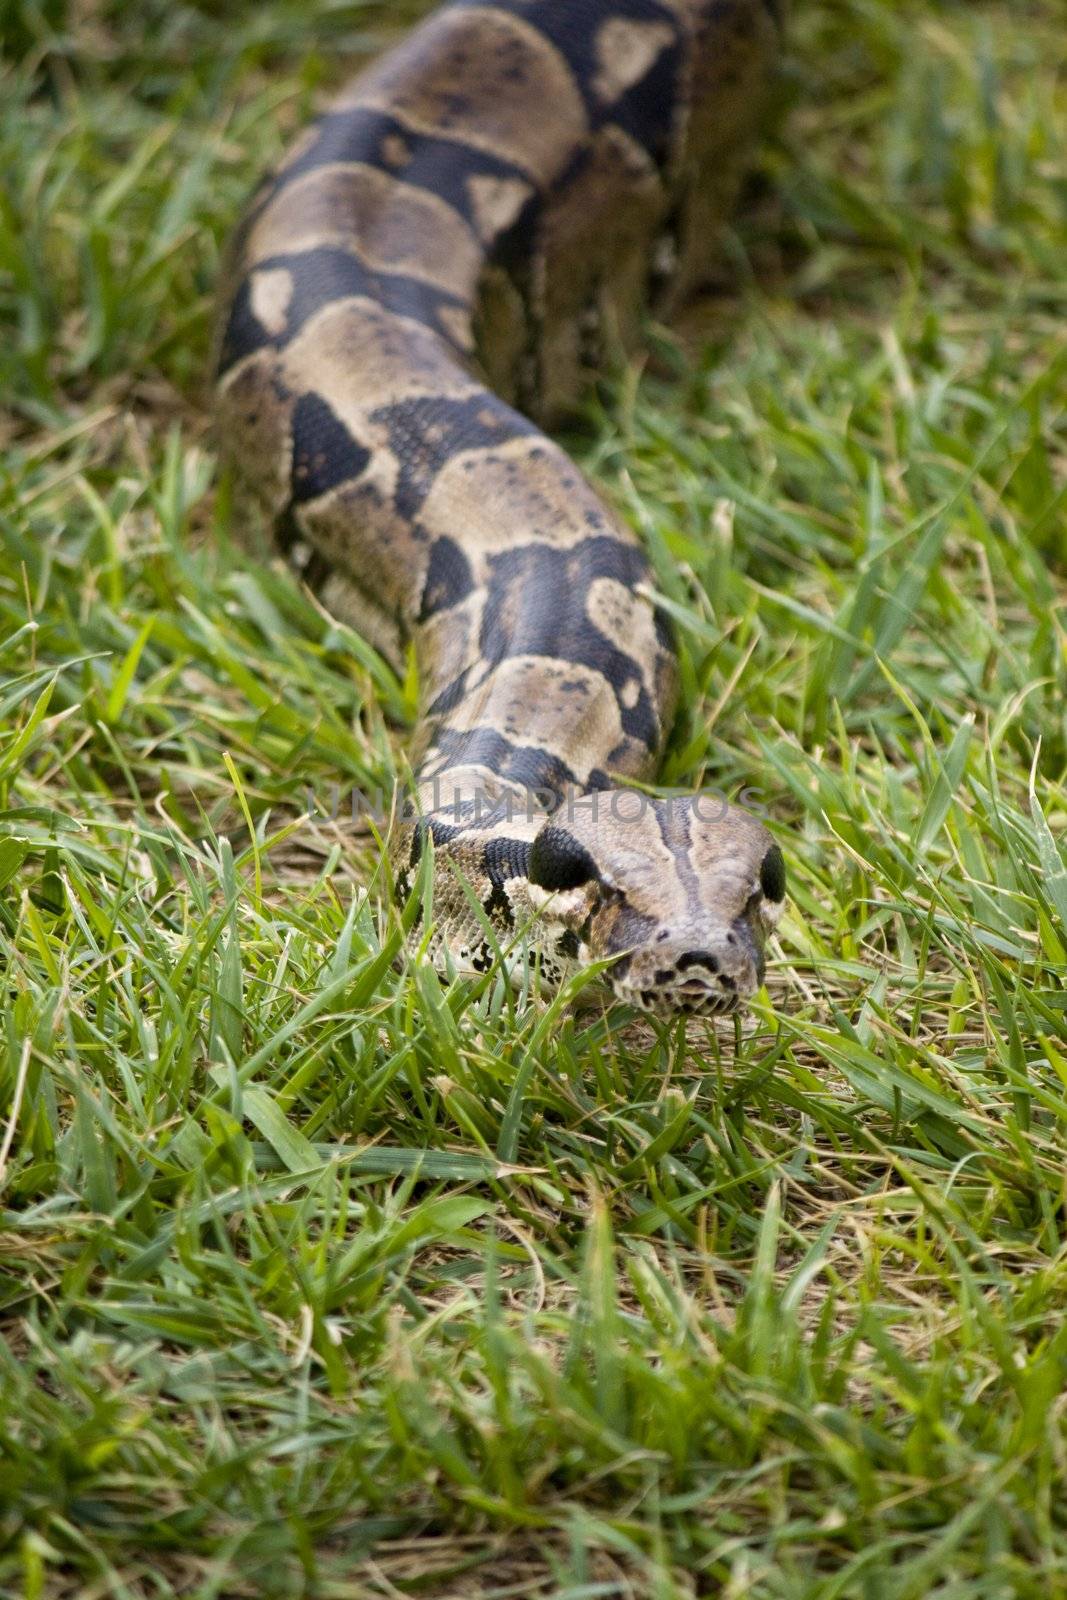 View of the head of a boa constrictor snake sliding on the grass.